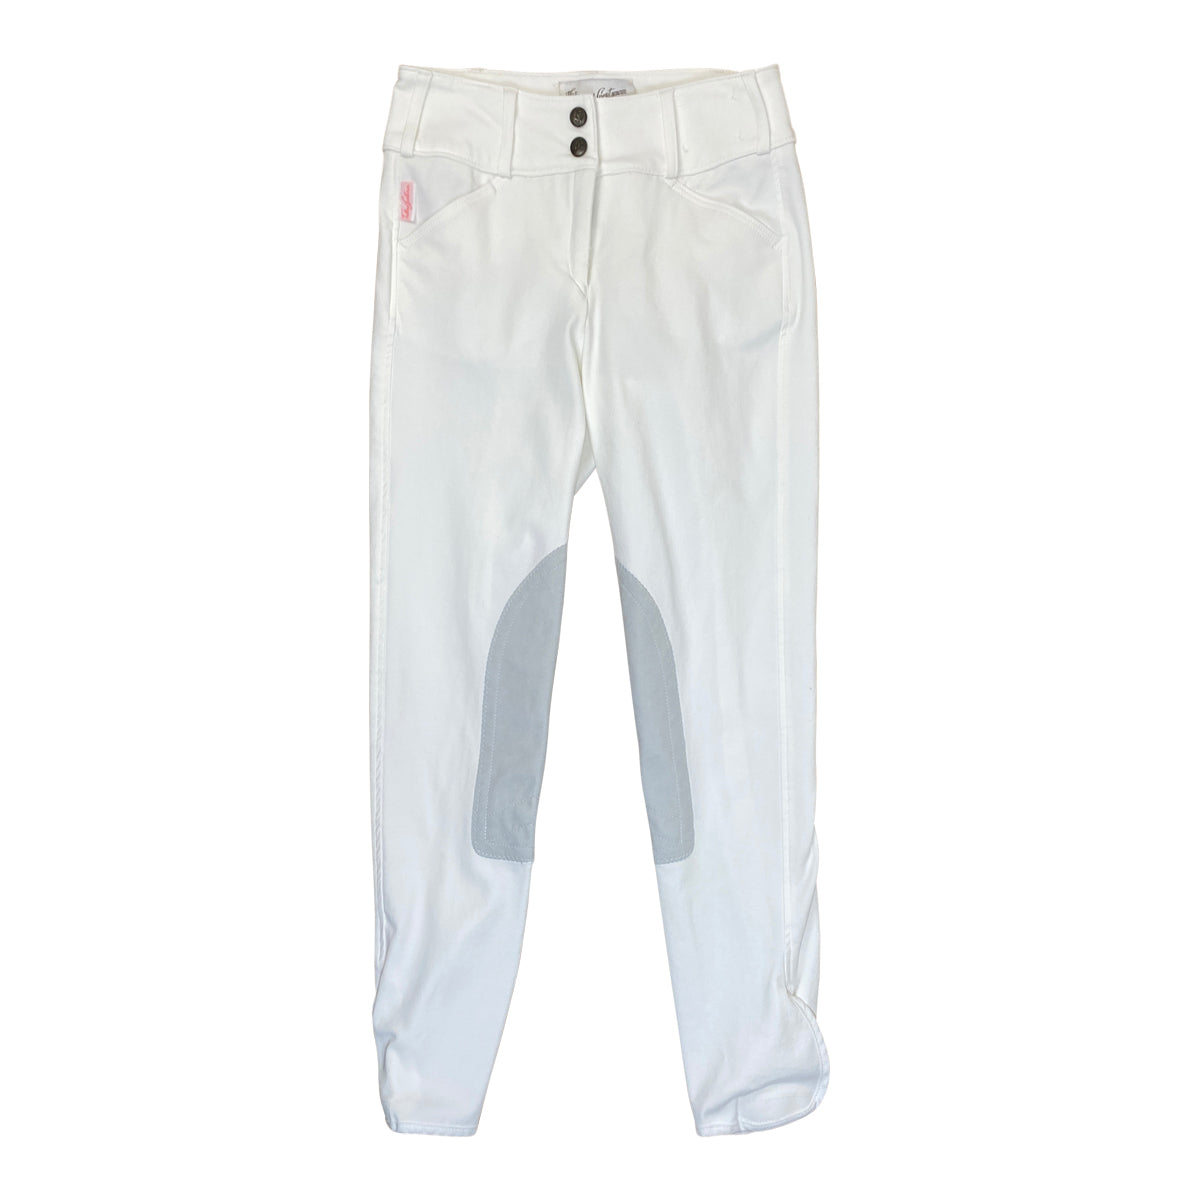 Tailored Sportsman 'Trophy Hunter' Breeches in White